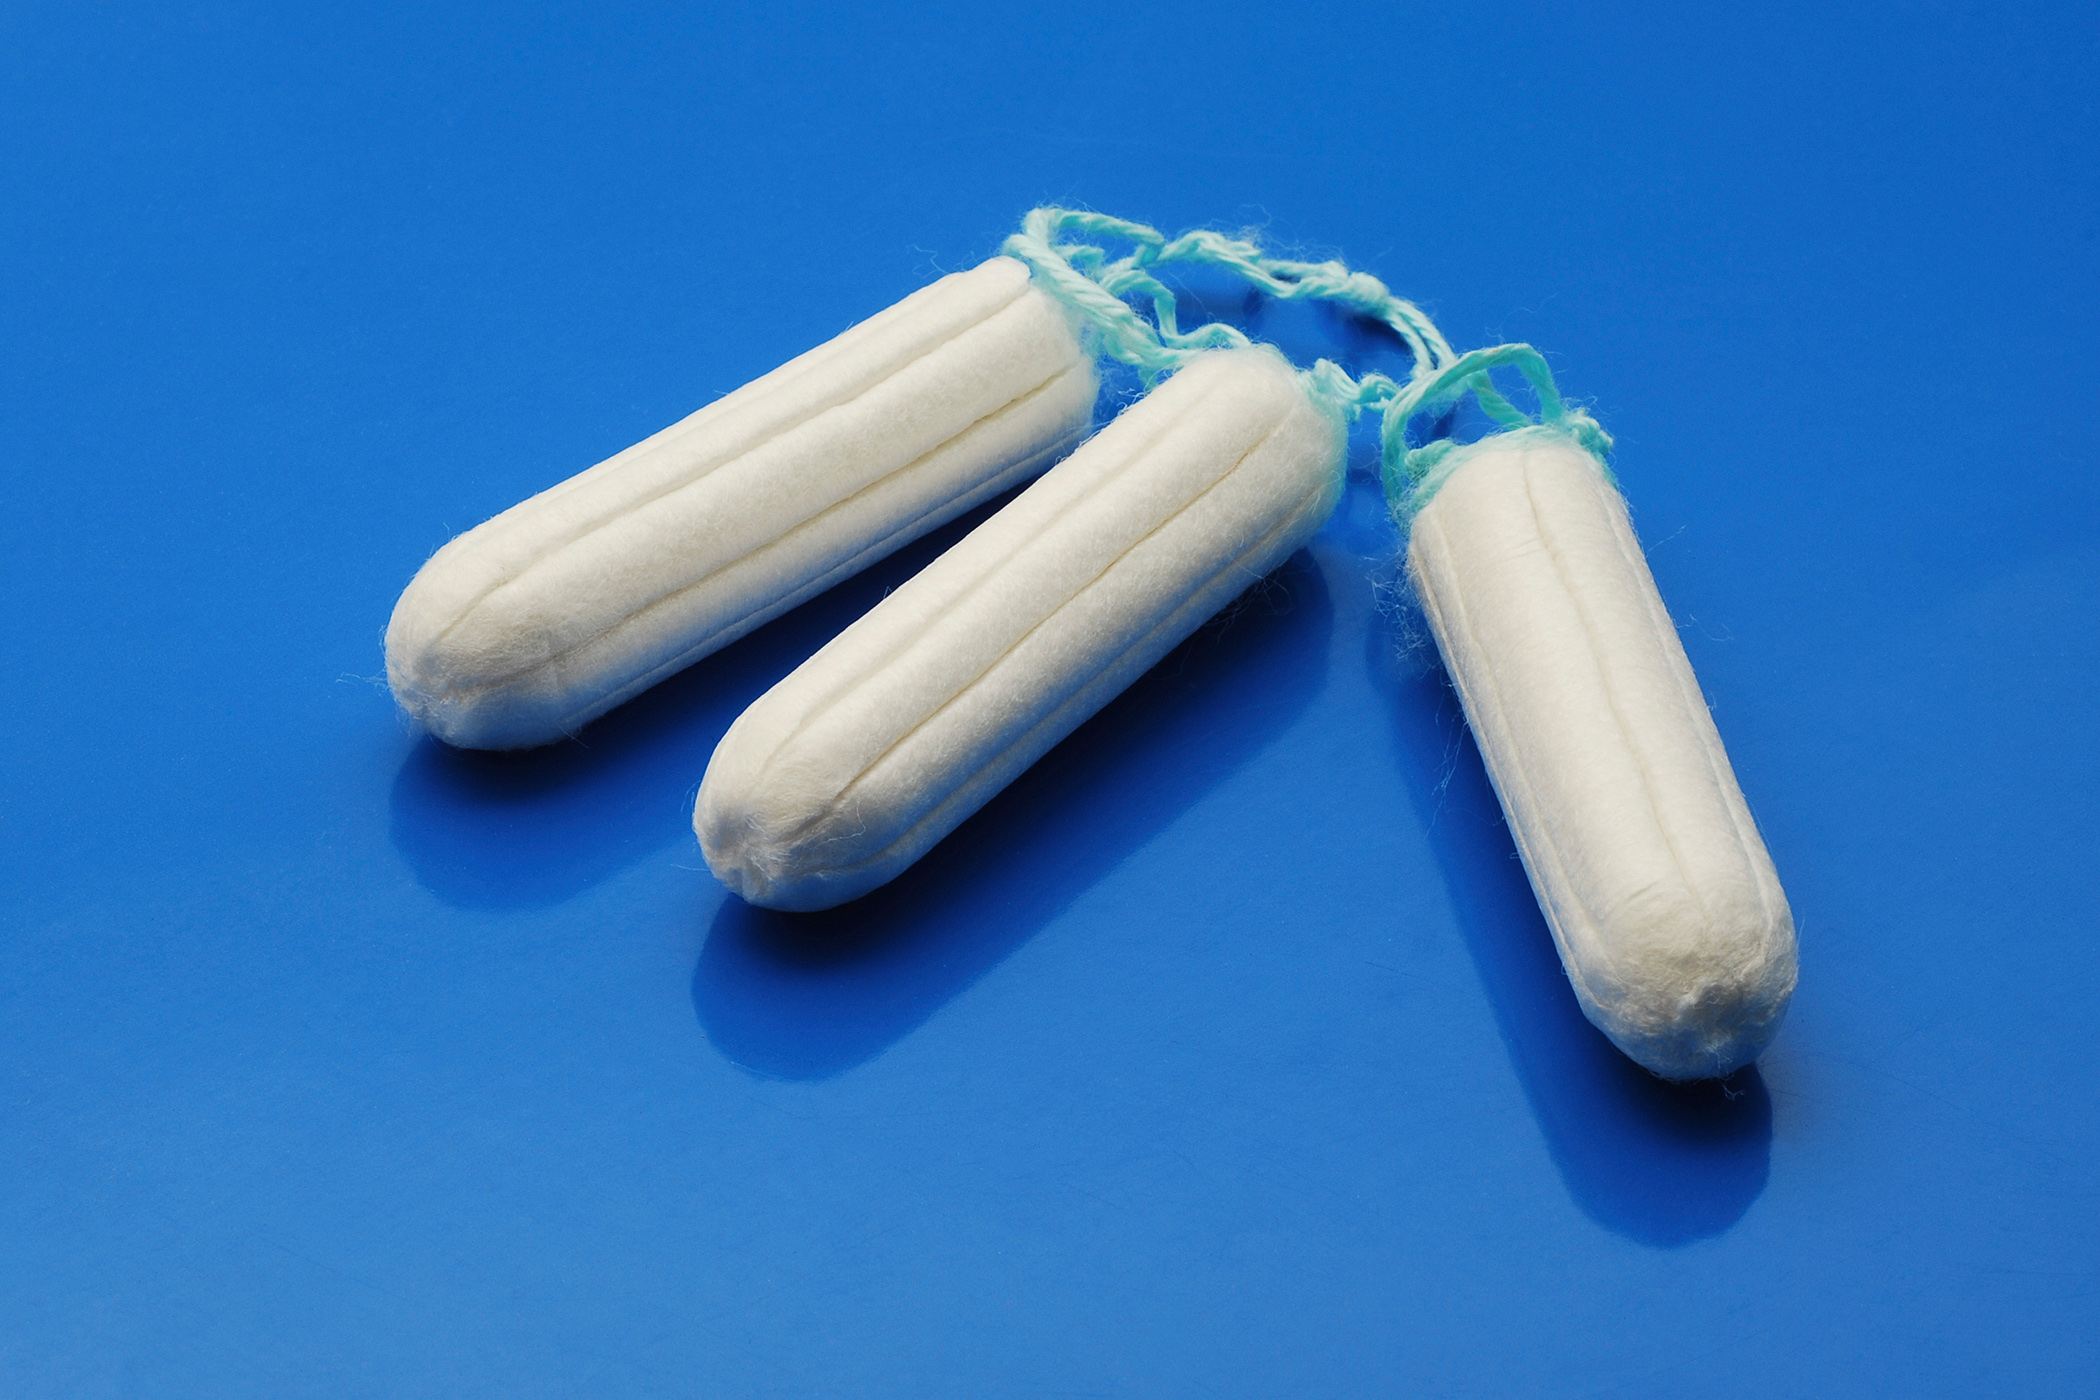 Money raised by a U.K. tax on sanitary products was used to fund an anti-abortion charity. (Getty Images)